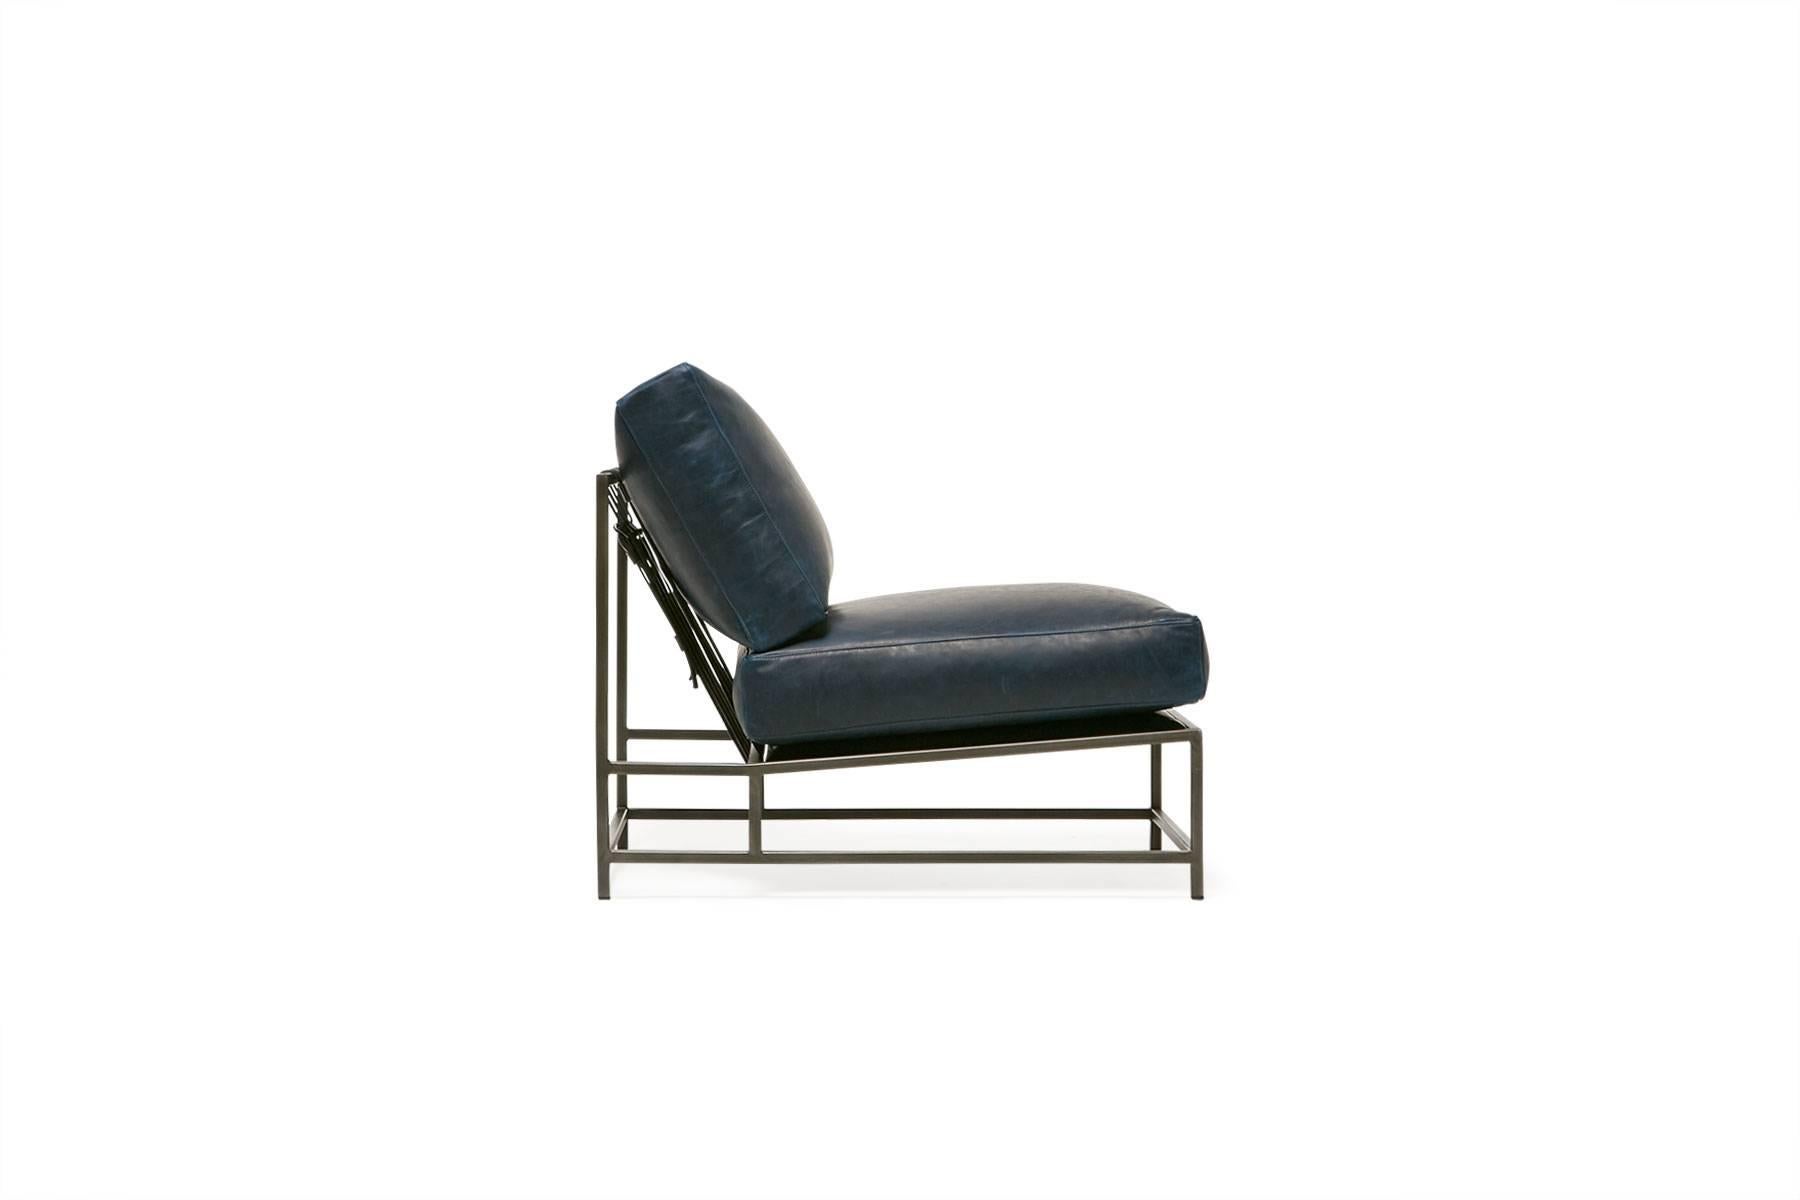 Sleek and refined, the Inheritance Chair is a great addition to nearly any space. 

This variation is upholstered in a rich navy leather. The foam seat cushions have been wrapped in down, allowing for a soft and comfortable lounge experience.